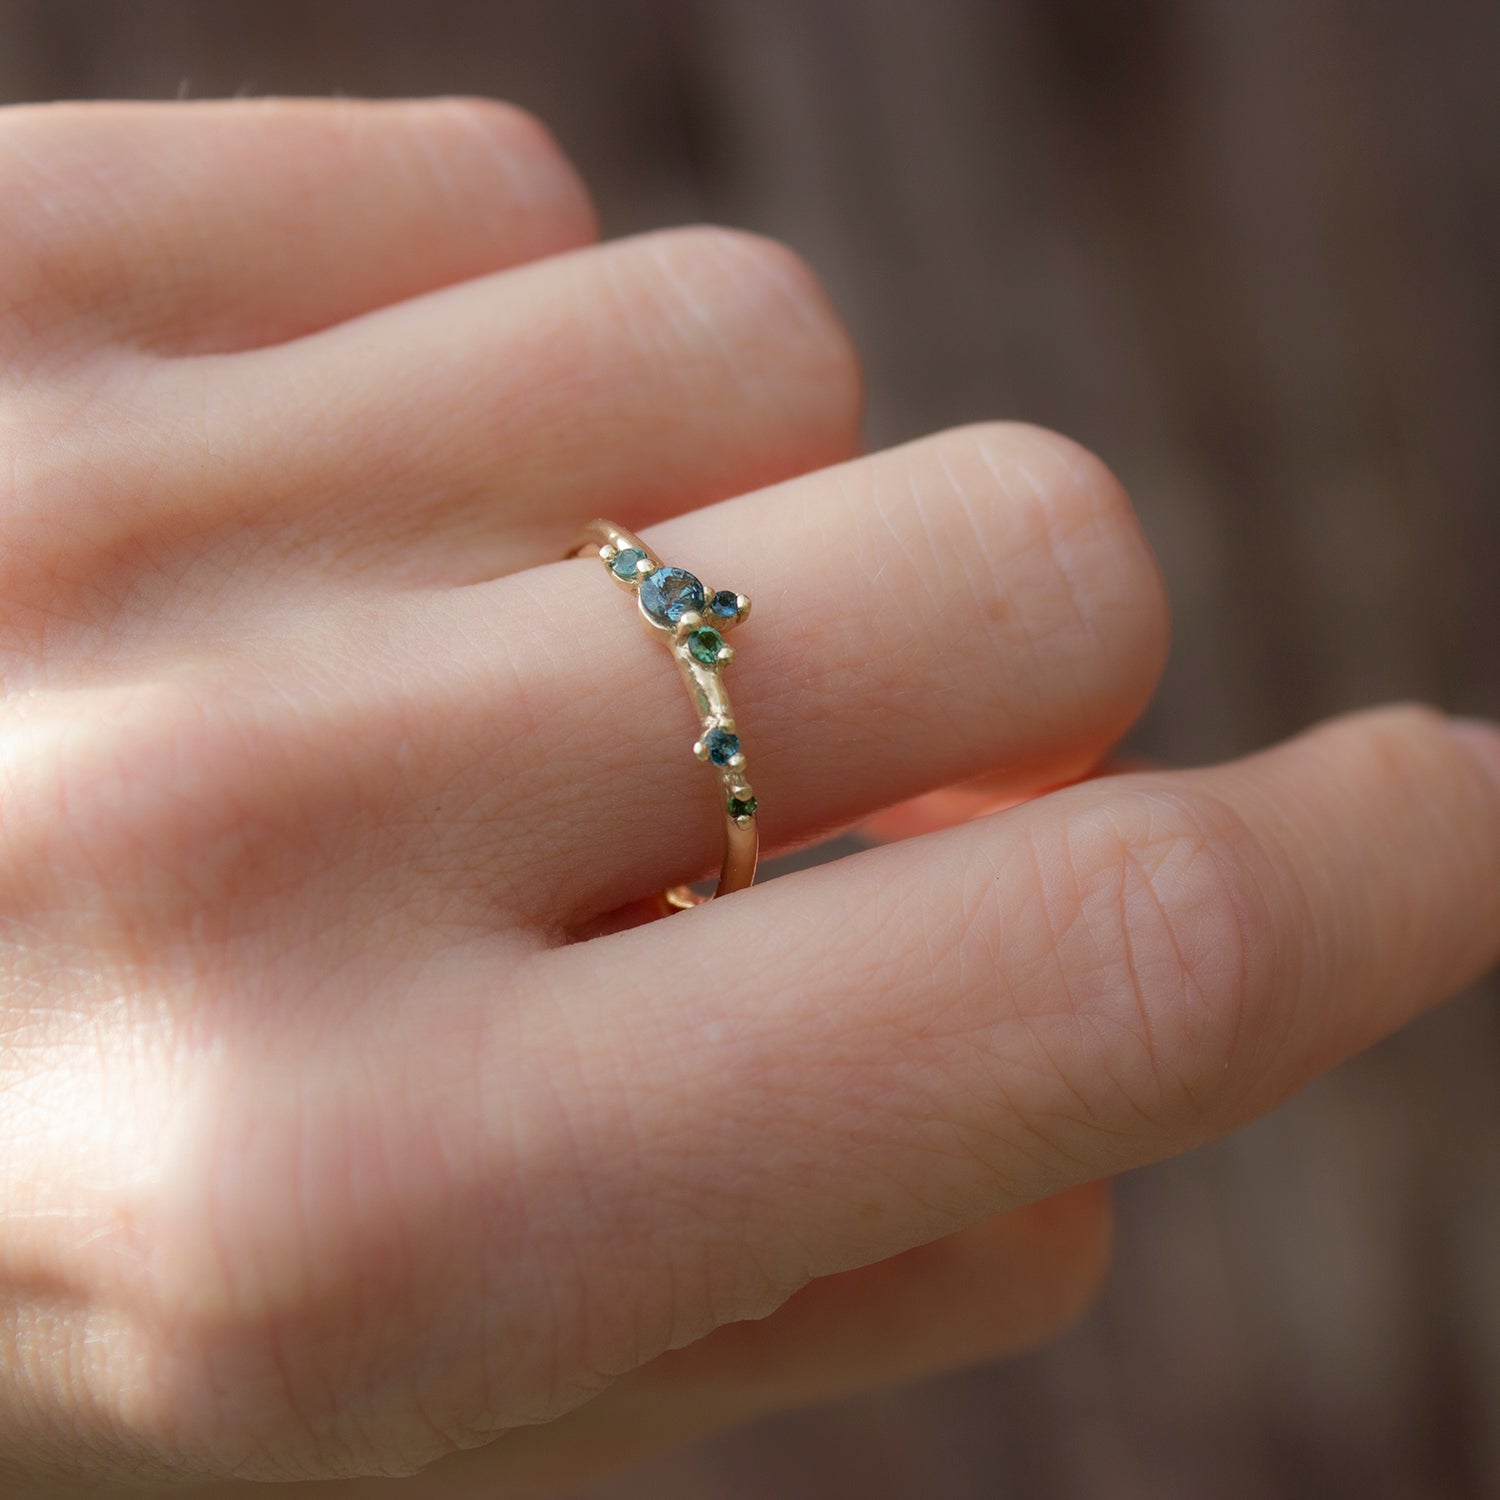 Ocean Blossom Ring - Teal Sapphire And Tourmalines - Irena Chmura Jewellery